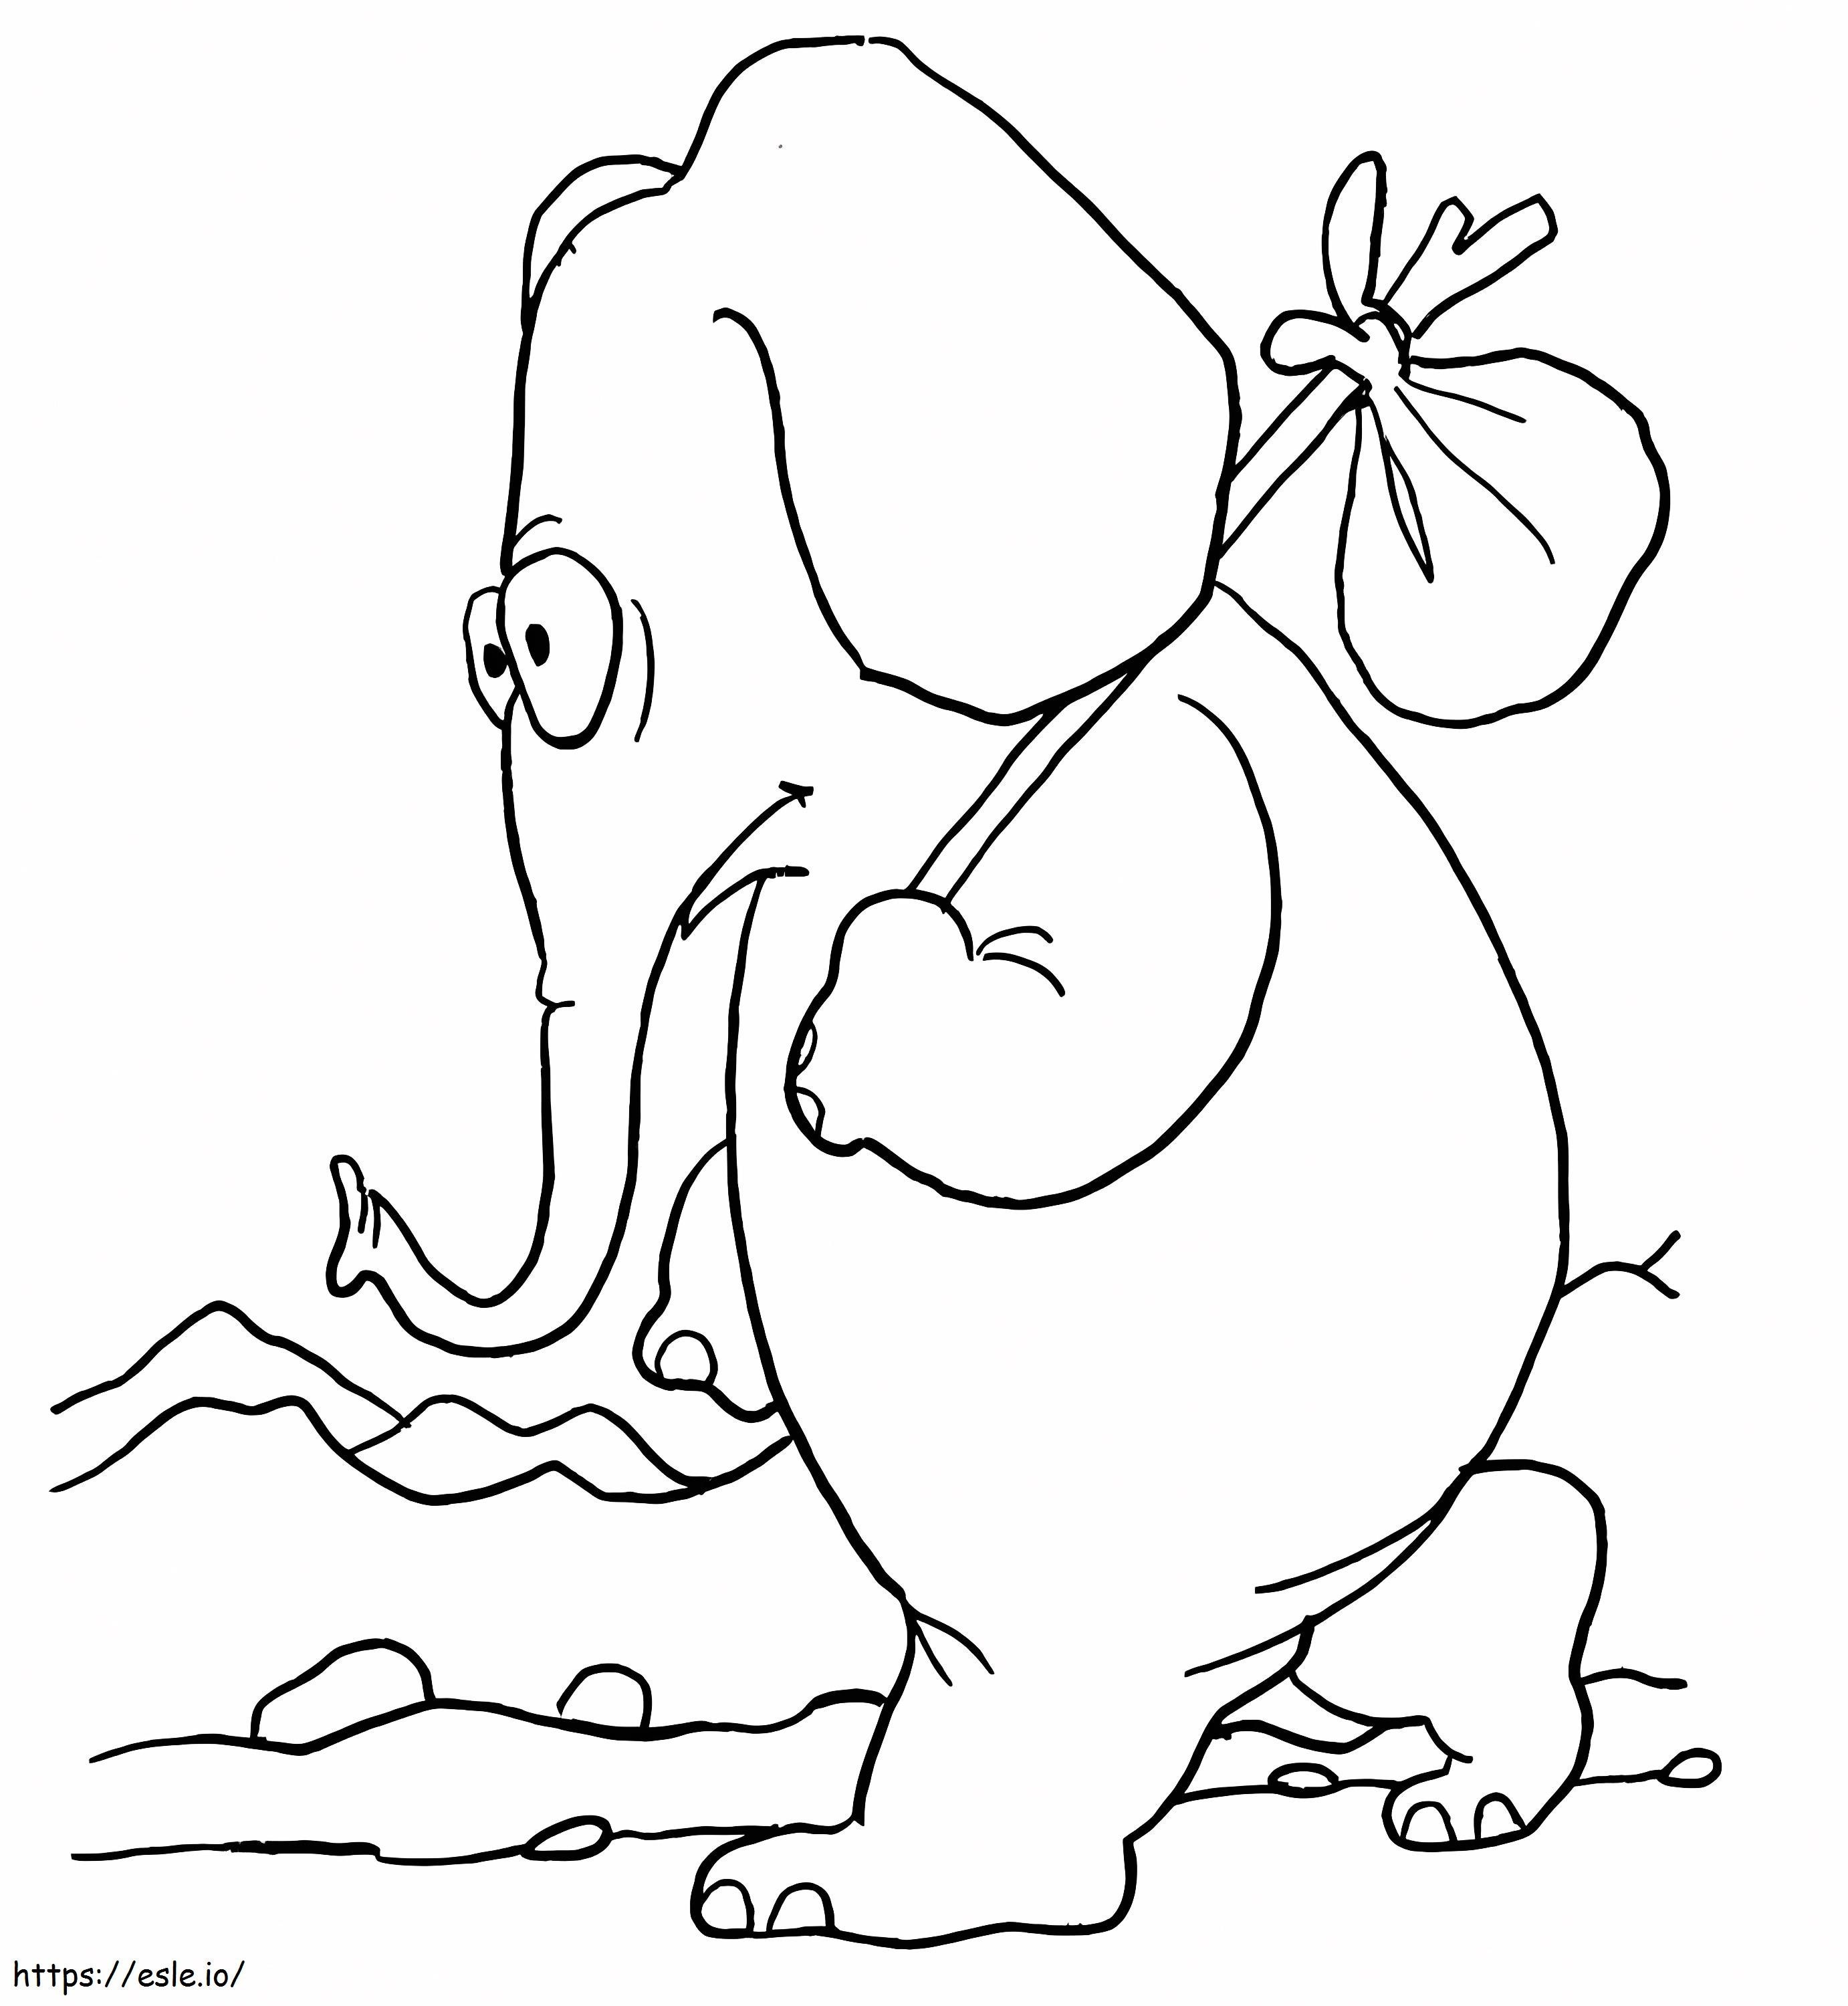 Elephant Leaving coloring page